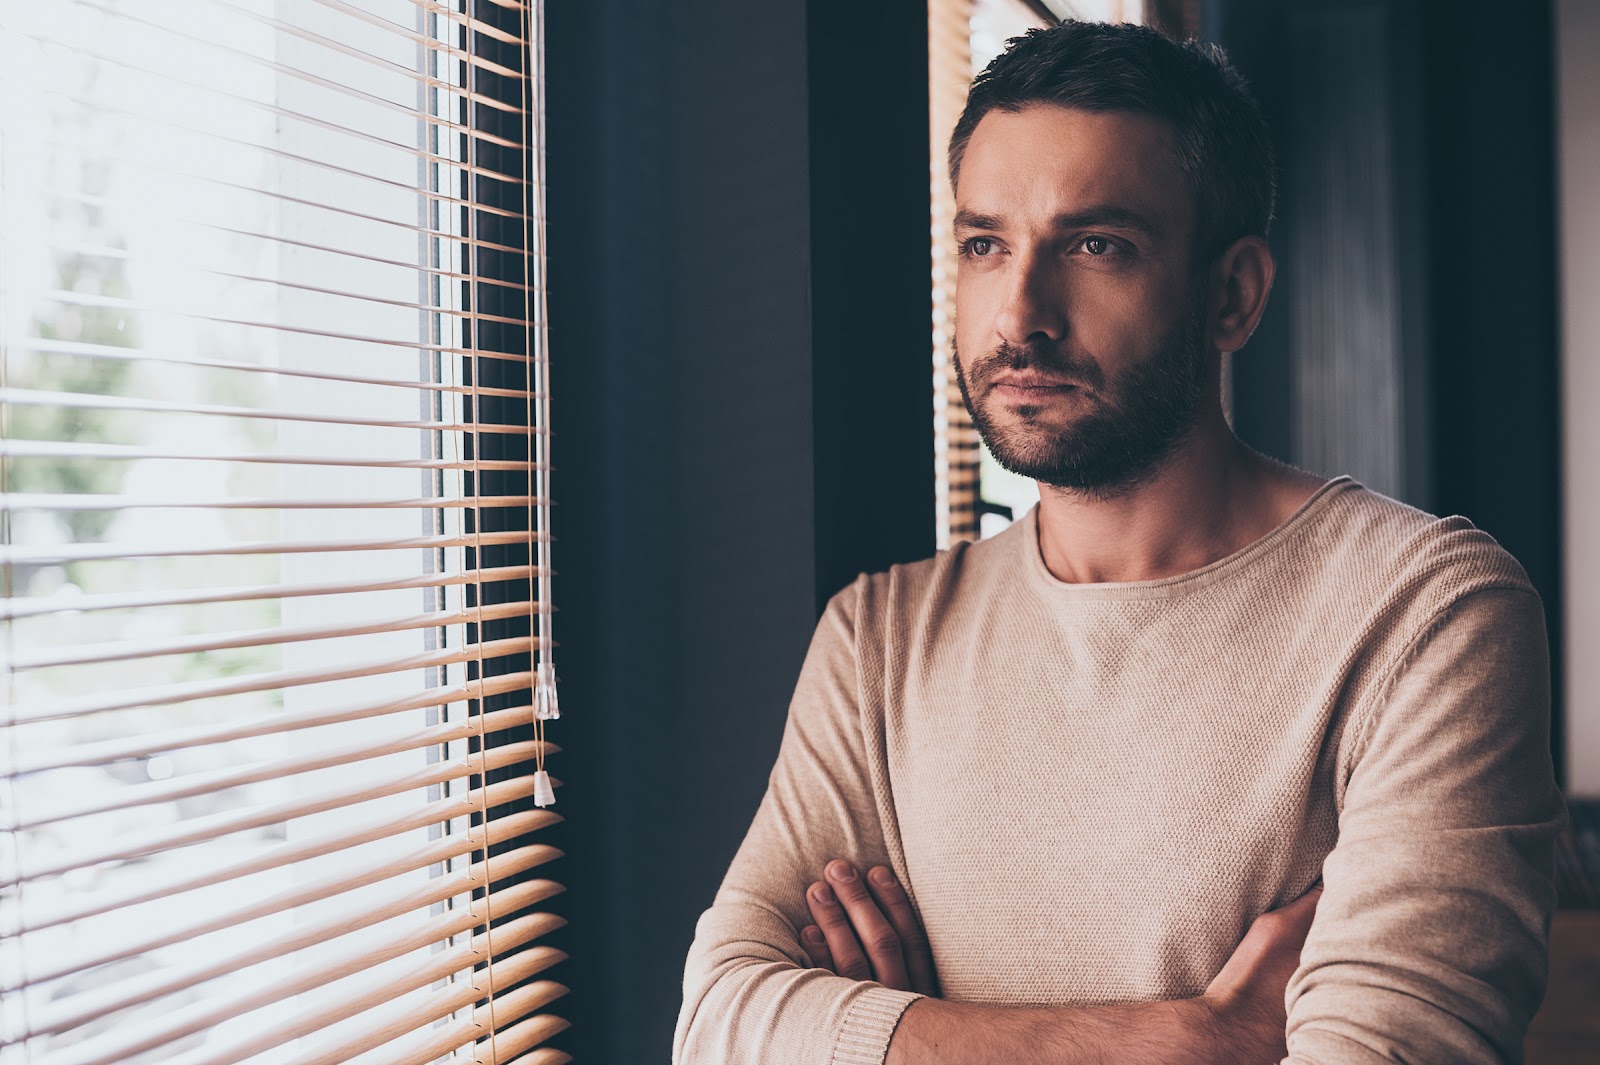 Negative self-talk gets in the way of practicing self-compassion. In this image, a dark-haired man stands in front of a dark wall, looking out a window. His expression is calm and thoughtful.